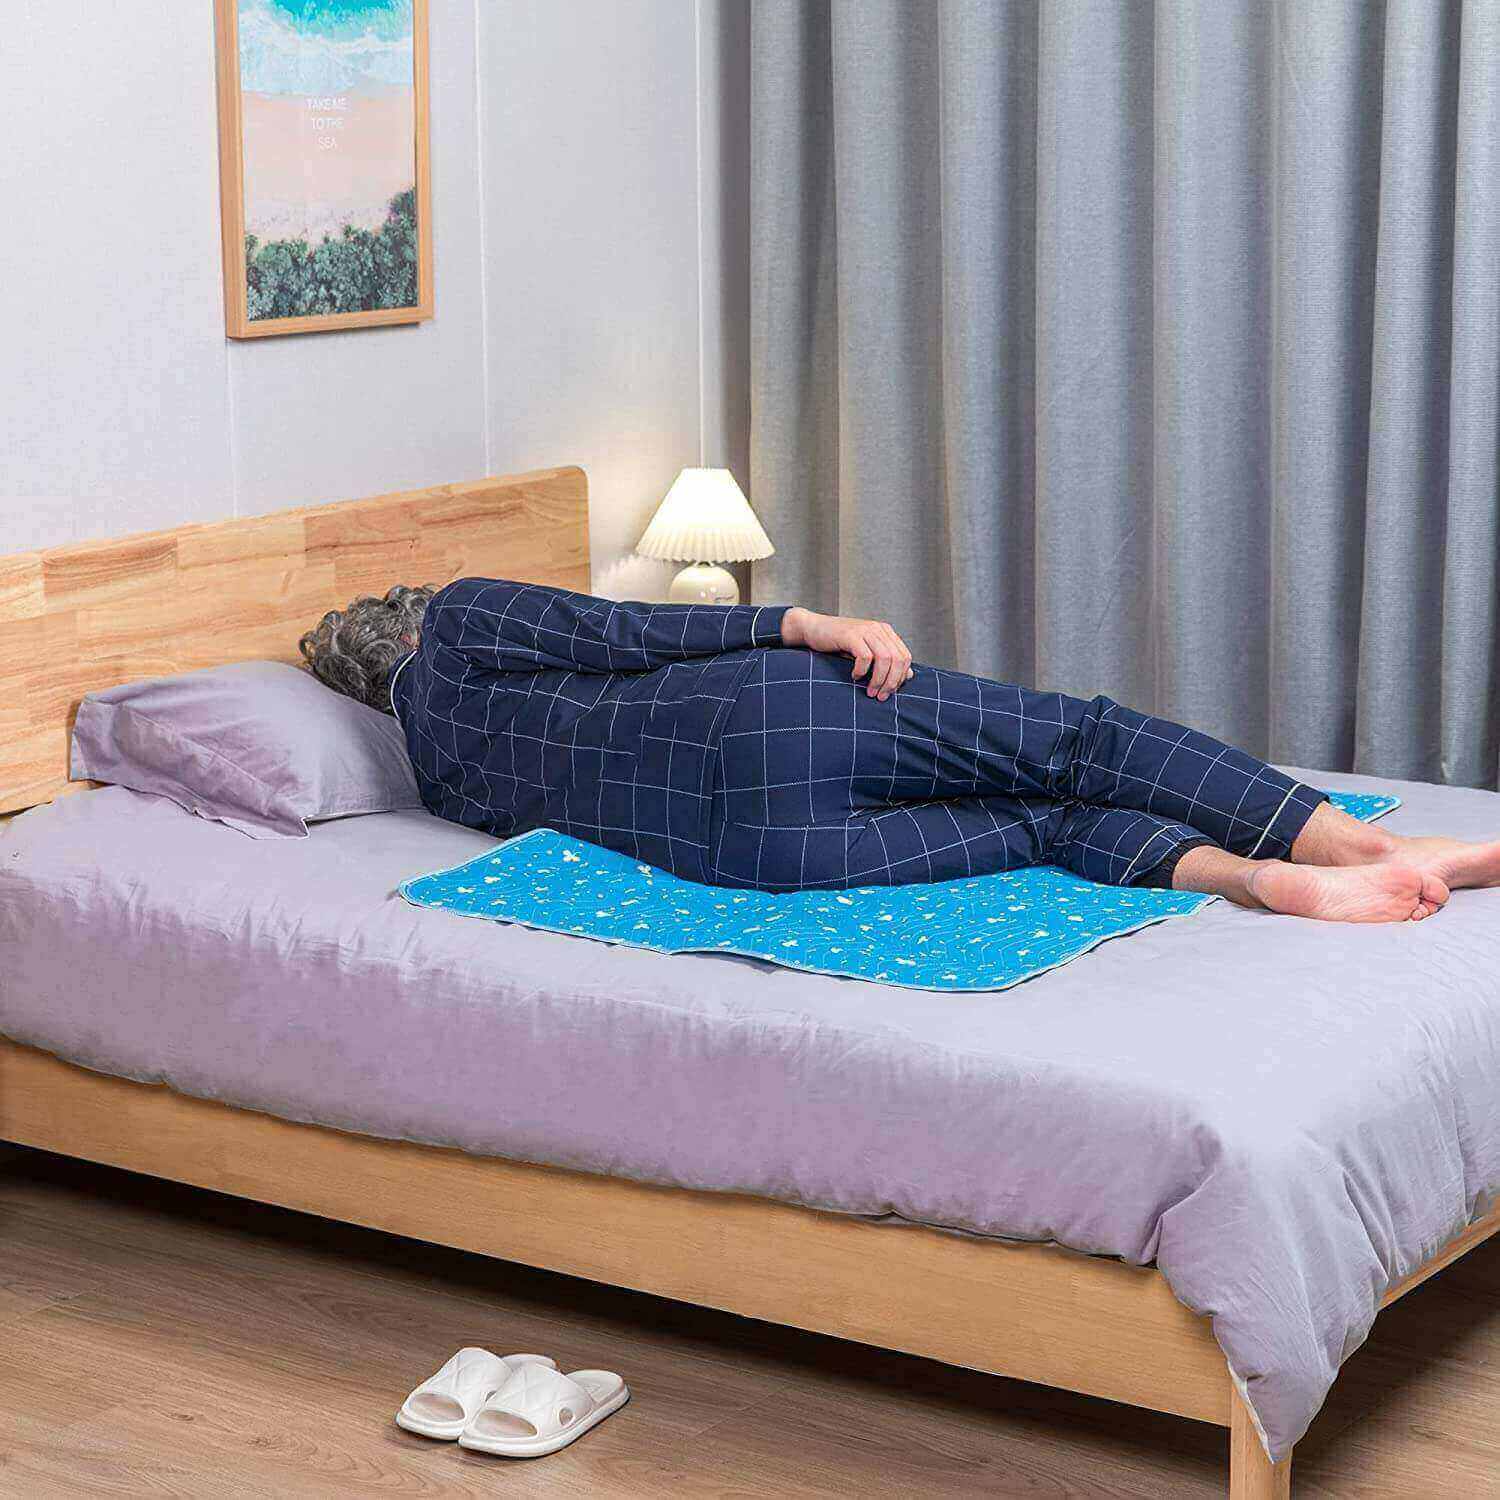 Fanwer incontinence bed pads, the pad on the bed